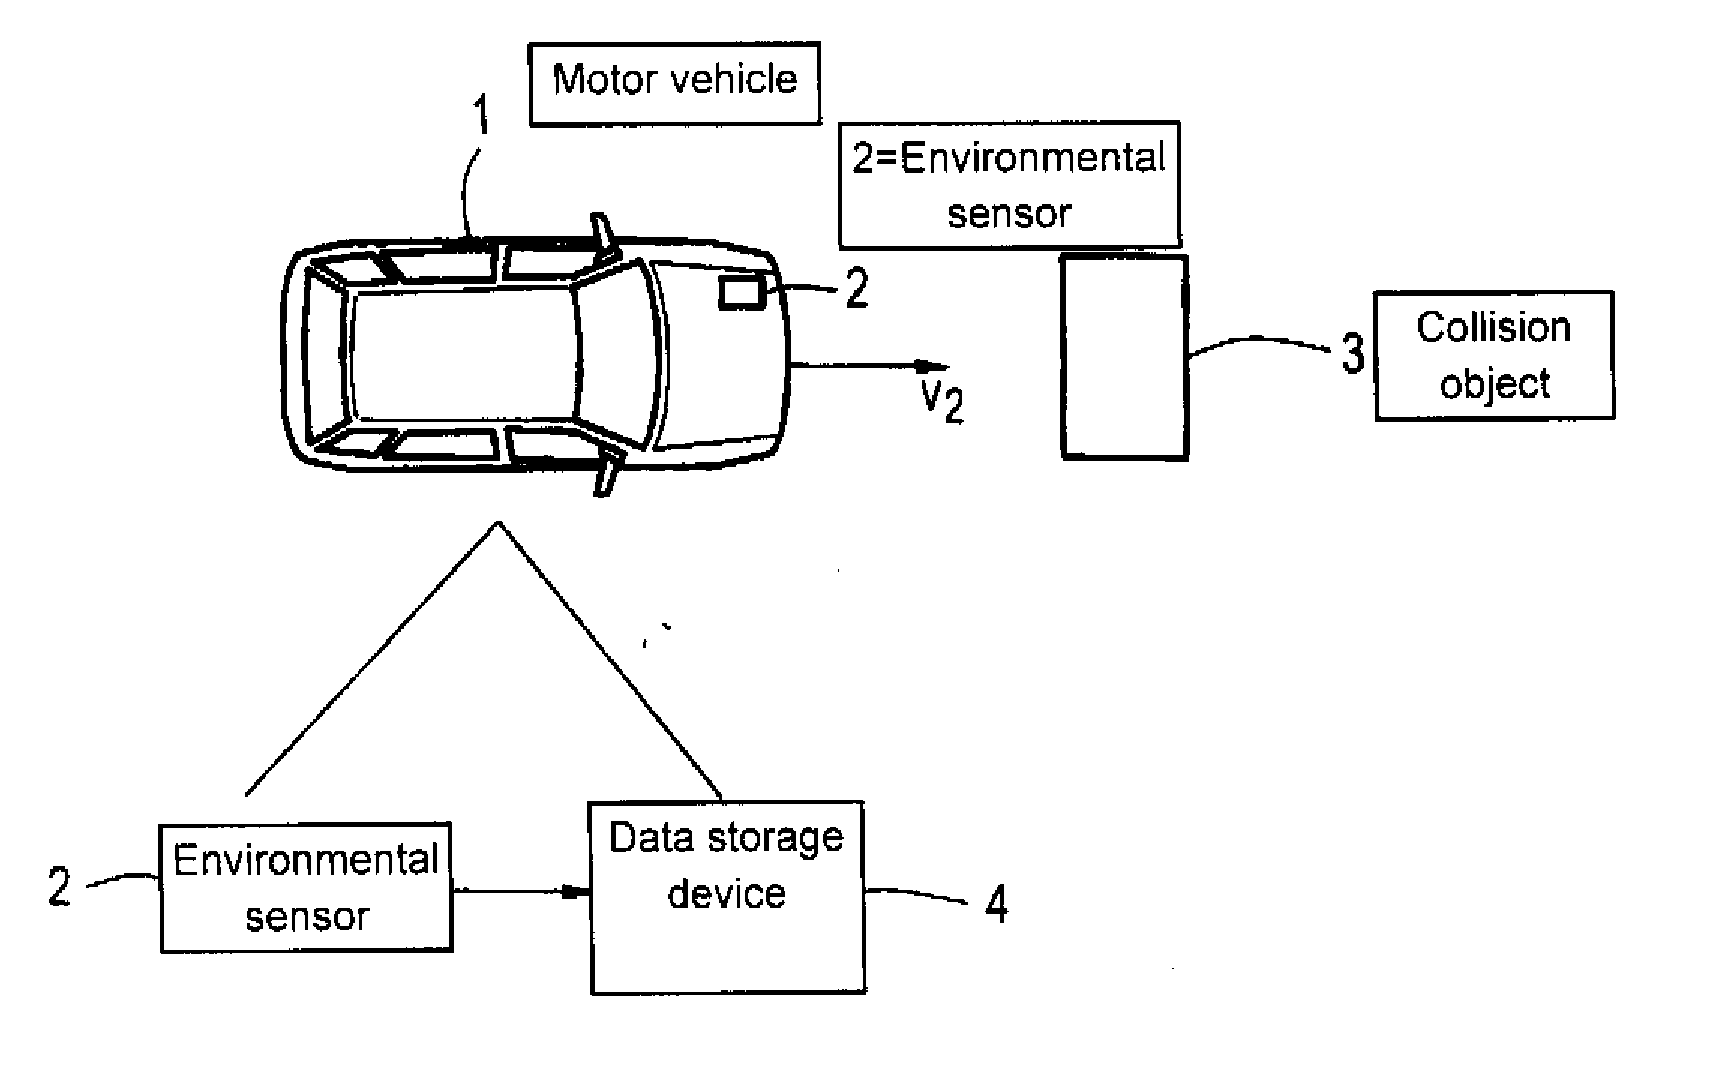 Method for emulating an environmental sensor in a motor vehicle and for testing an anticipatory safety system, and an emulation system